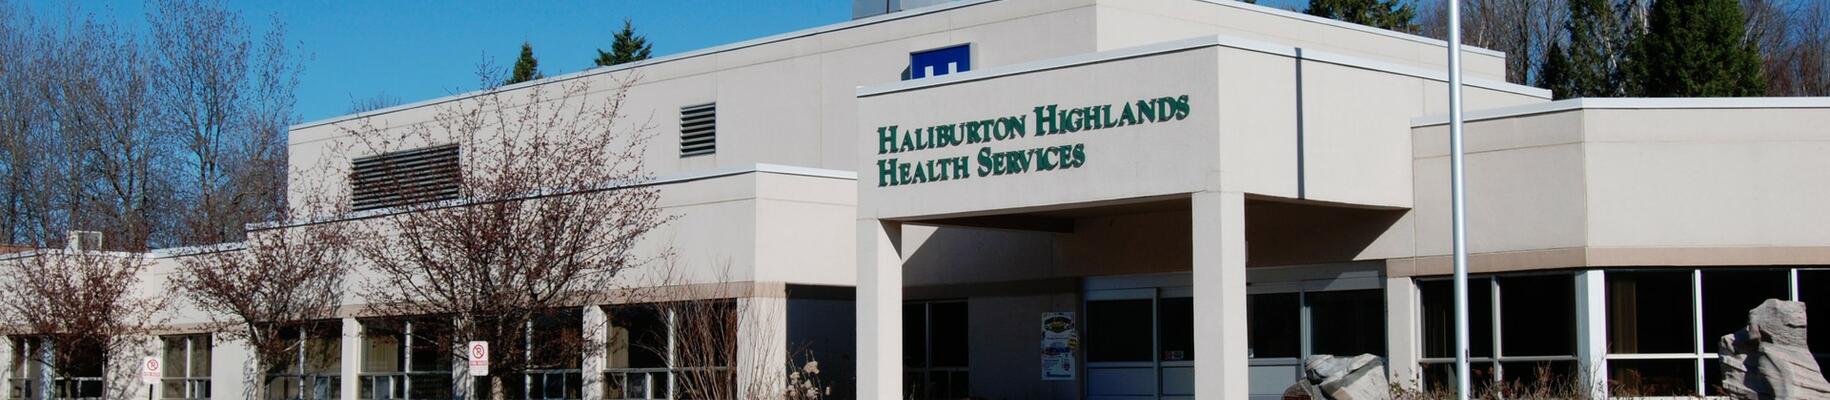 Letter to the Community from the Haliburton Highlands Health Services